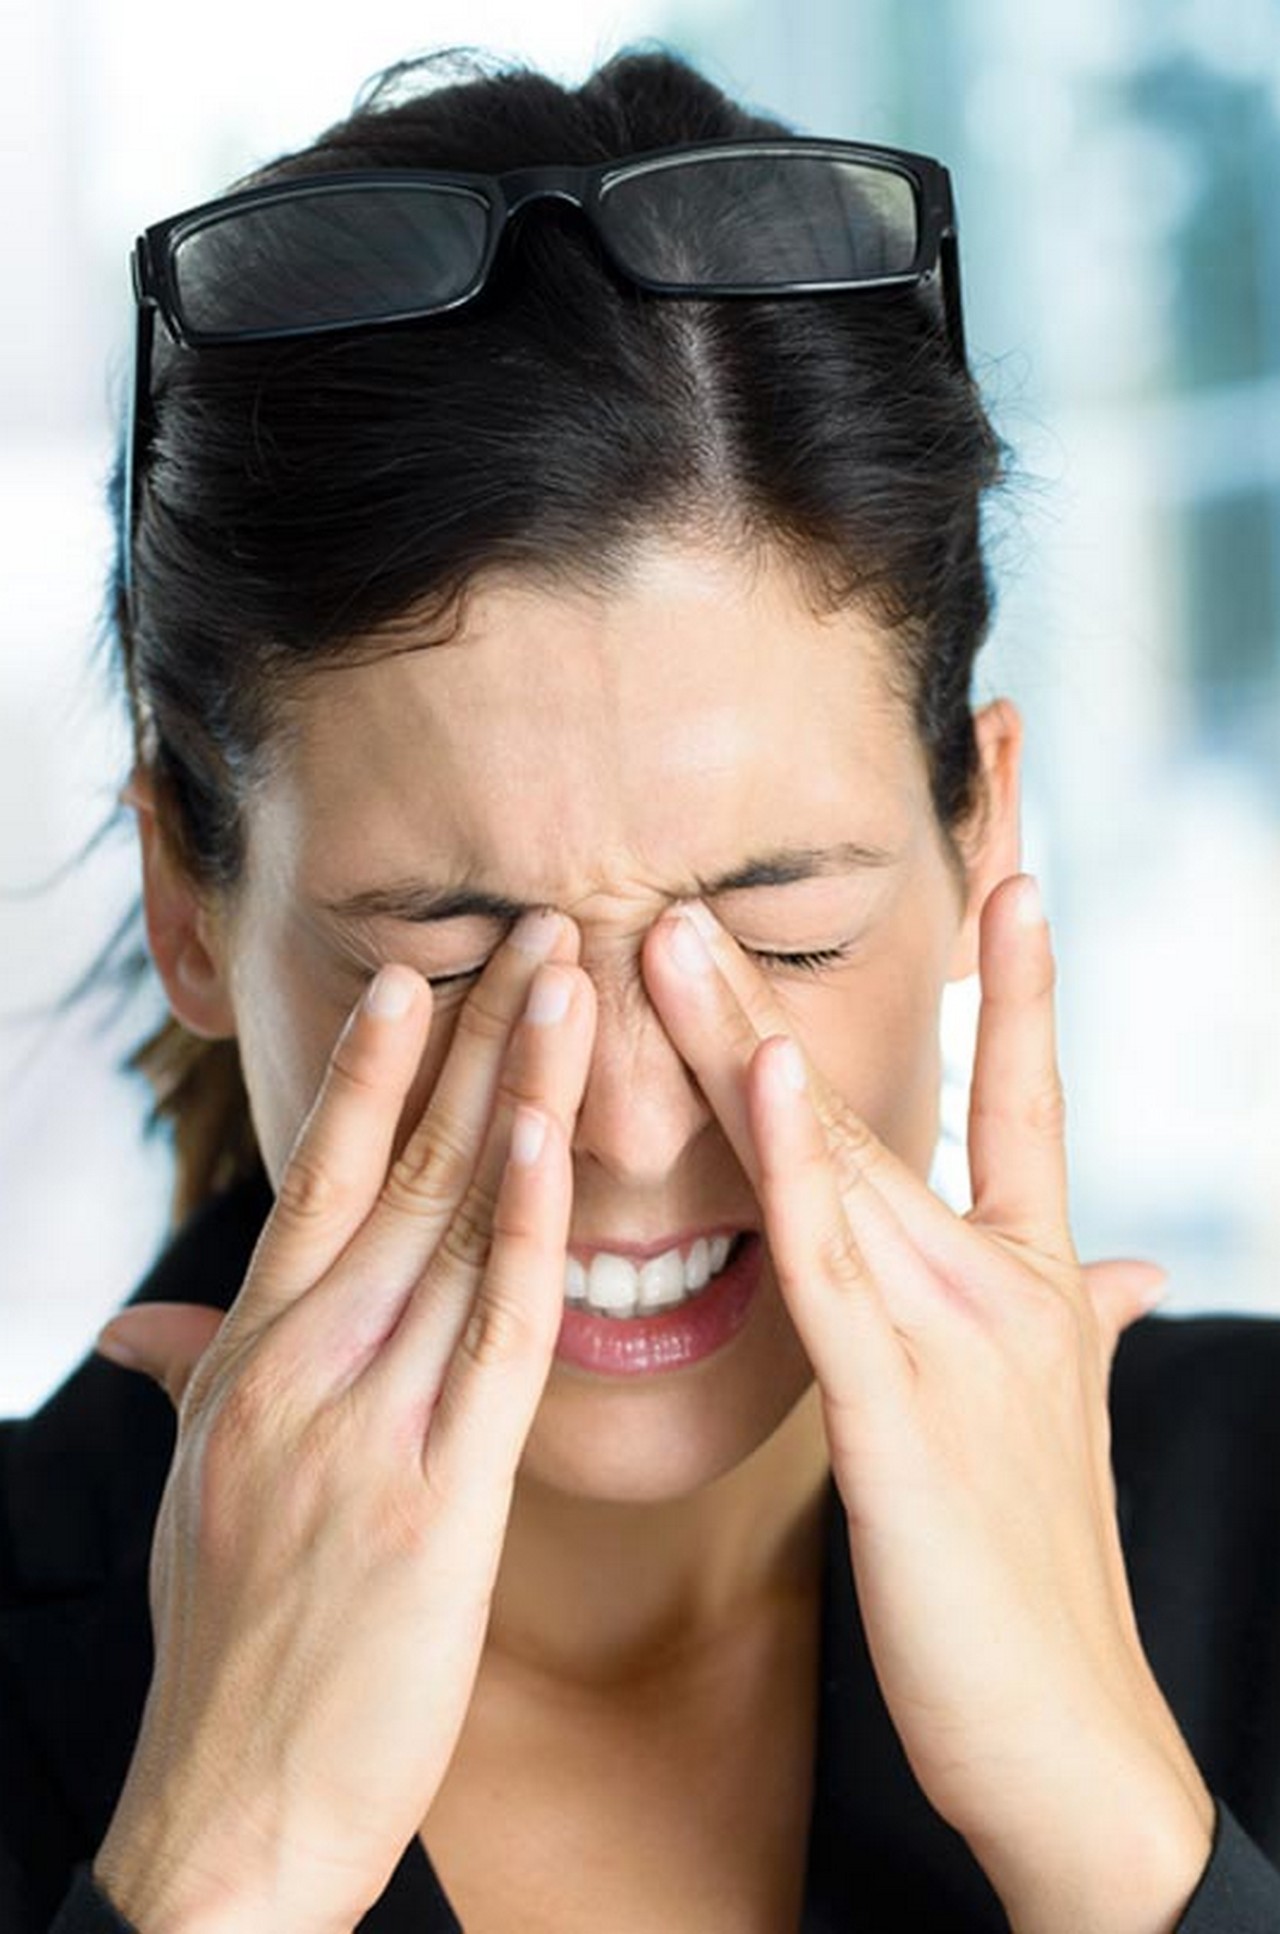  Home Remedies To Treat Sore Eyes – 14 Methods + Prevention Tips